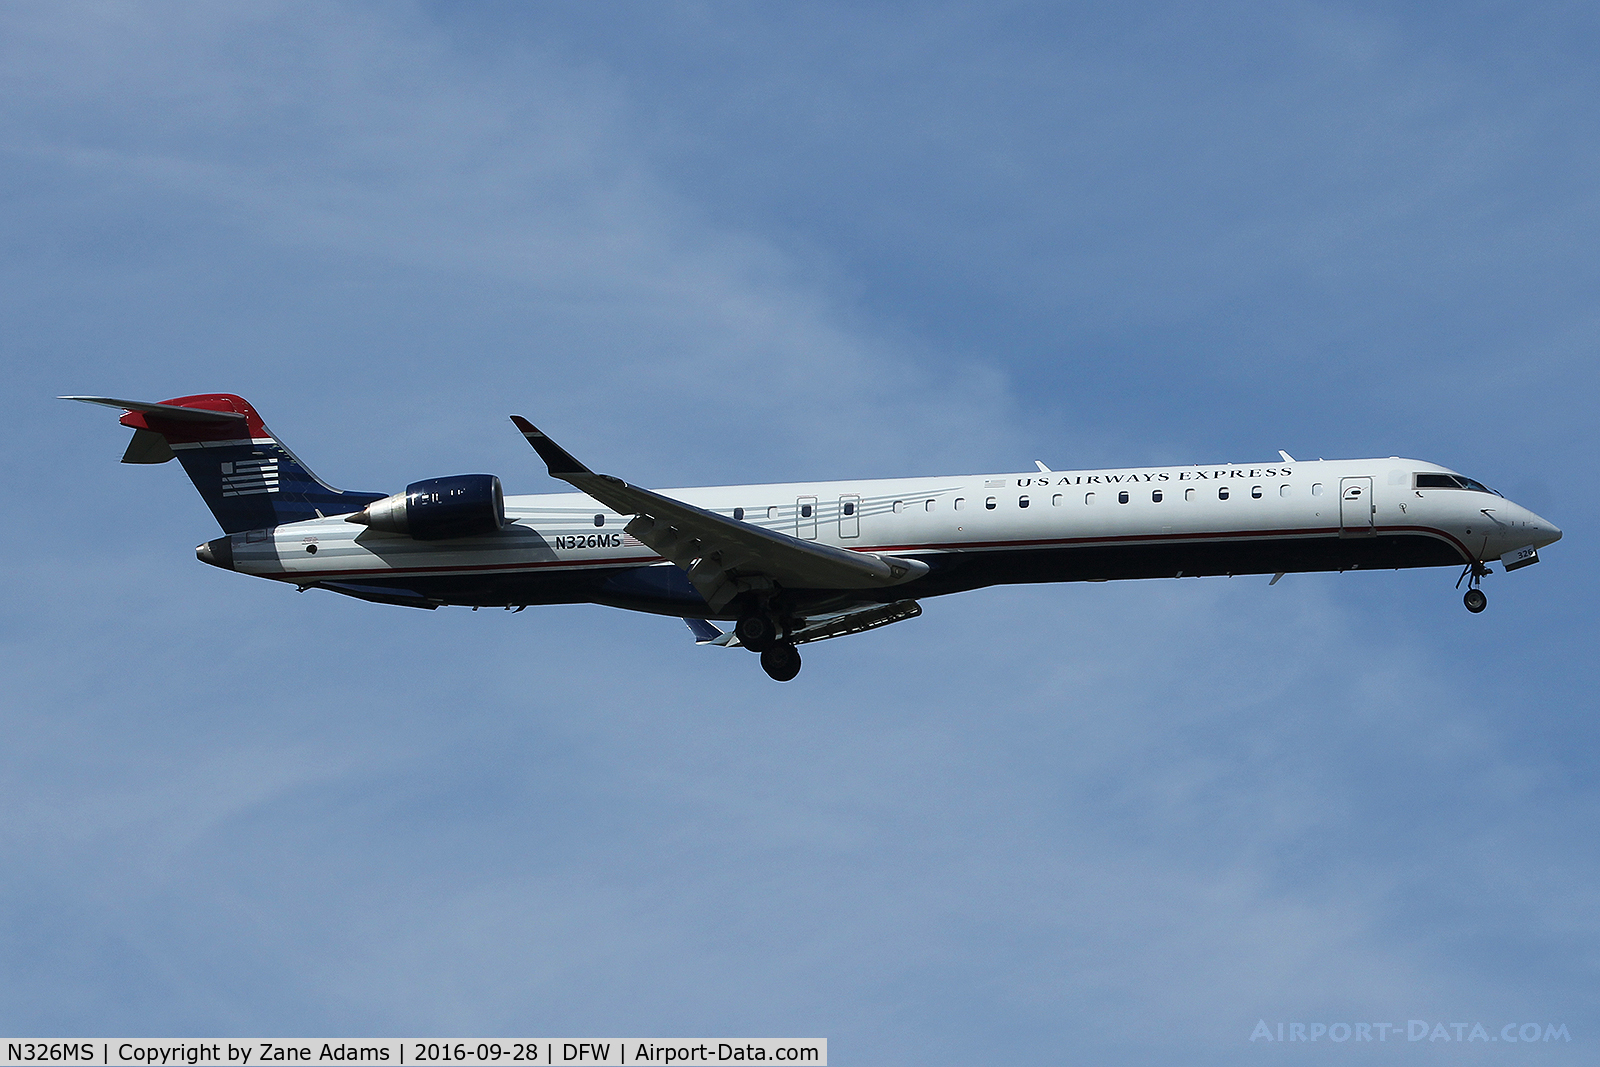 N326MS, 2008 Bombardier CRJ-900ER NG (CL-600-2D24) C/N 15124, Arriving at DFW Airport